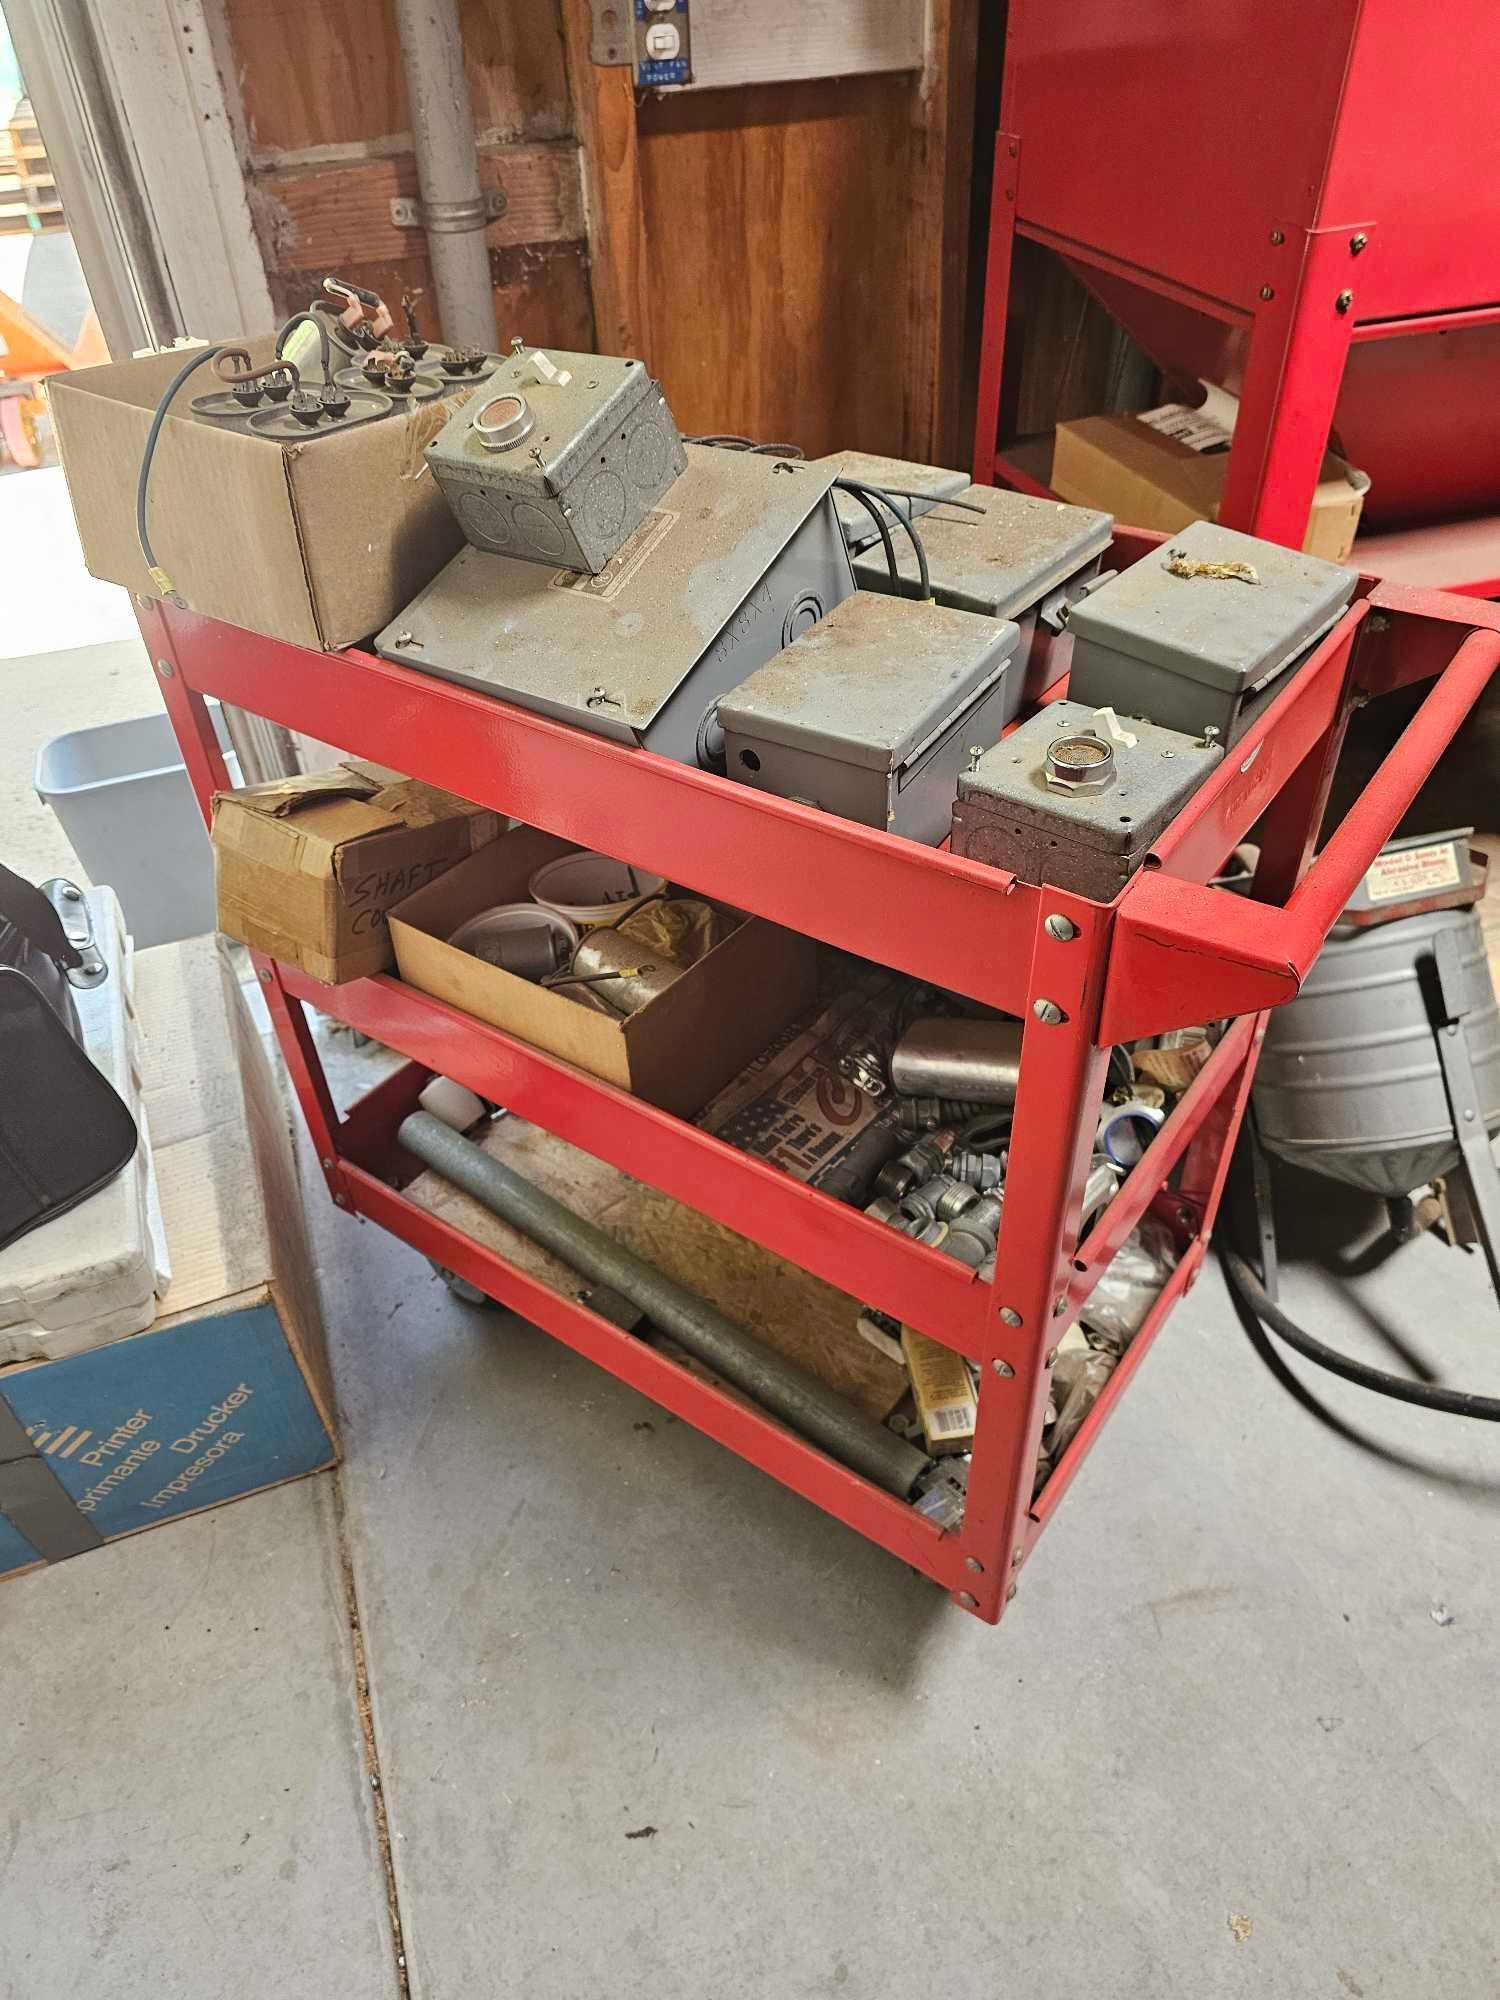 ROLLING CART WITH ELECTRICAL COMPONENTS